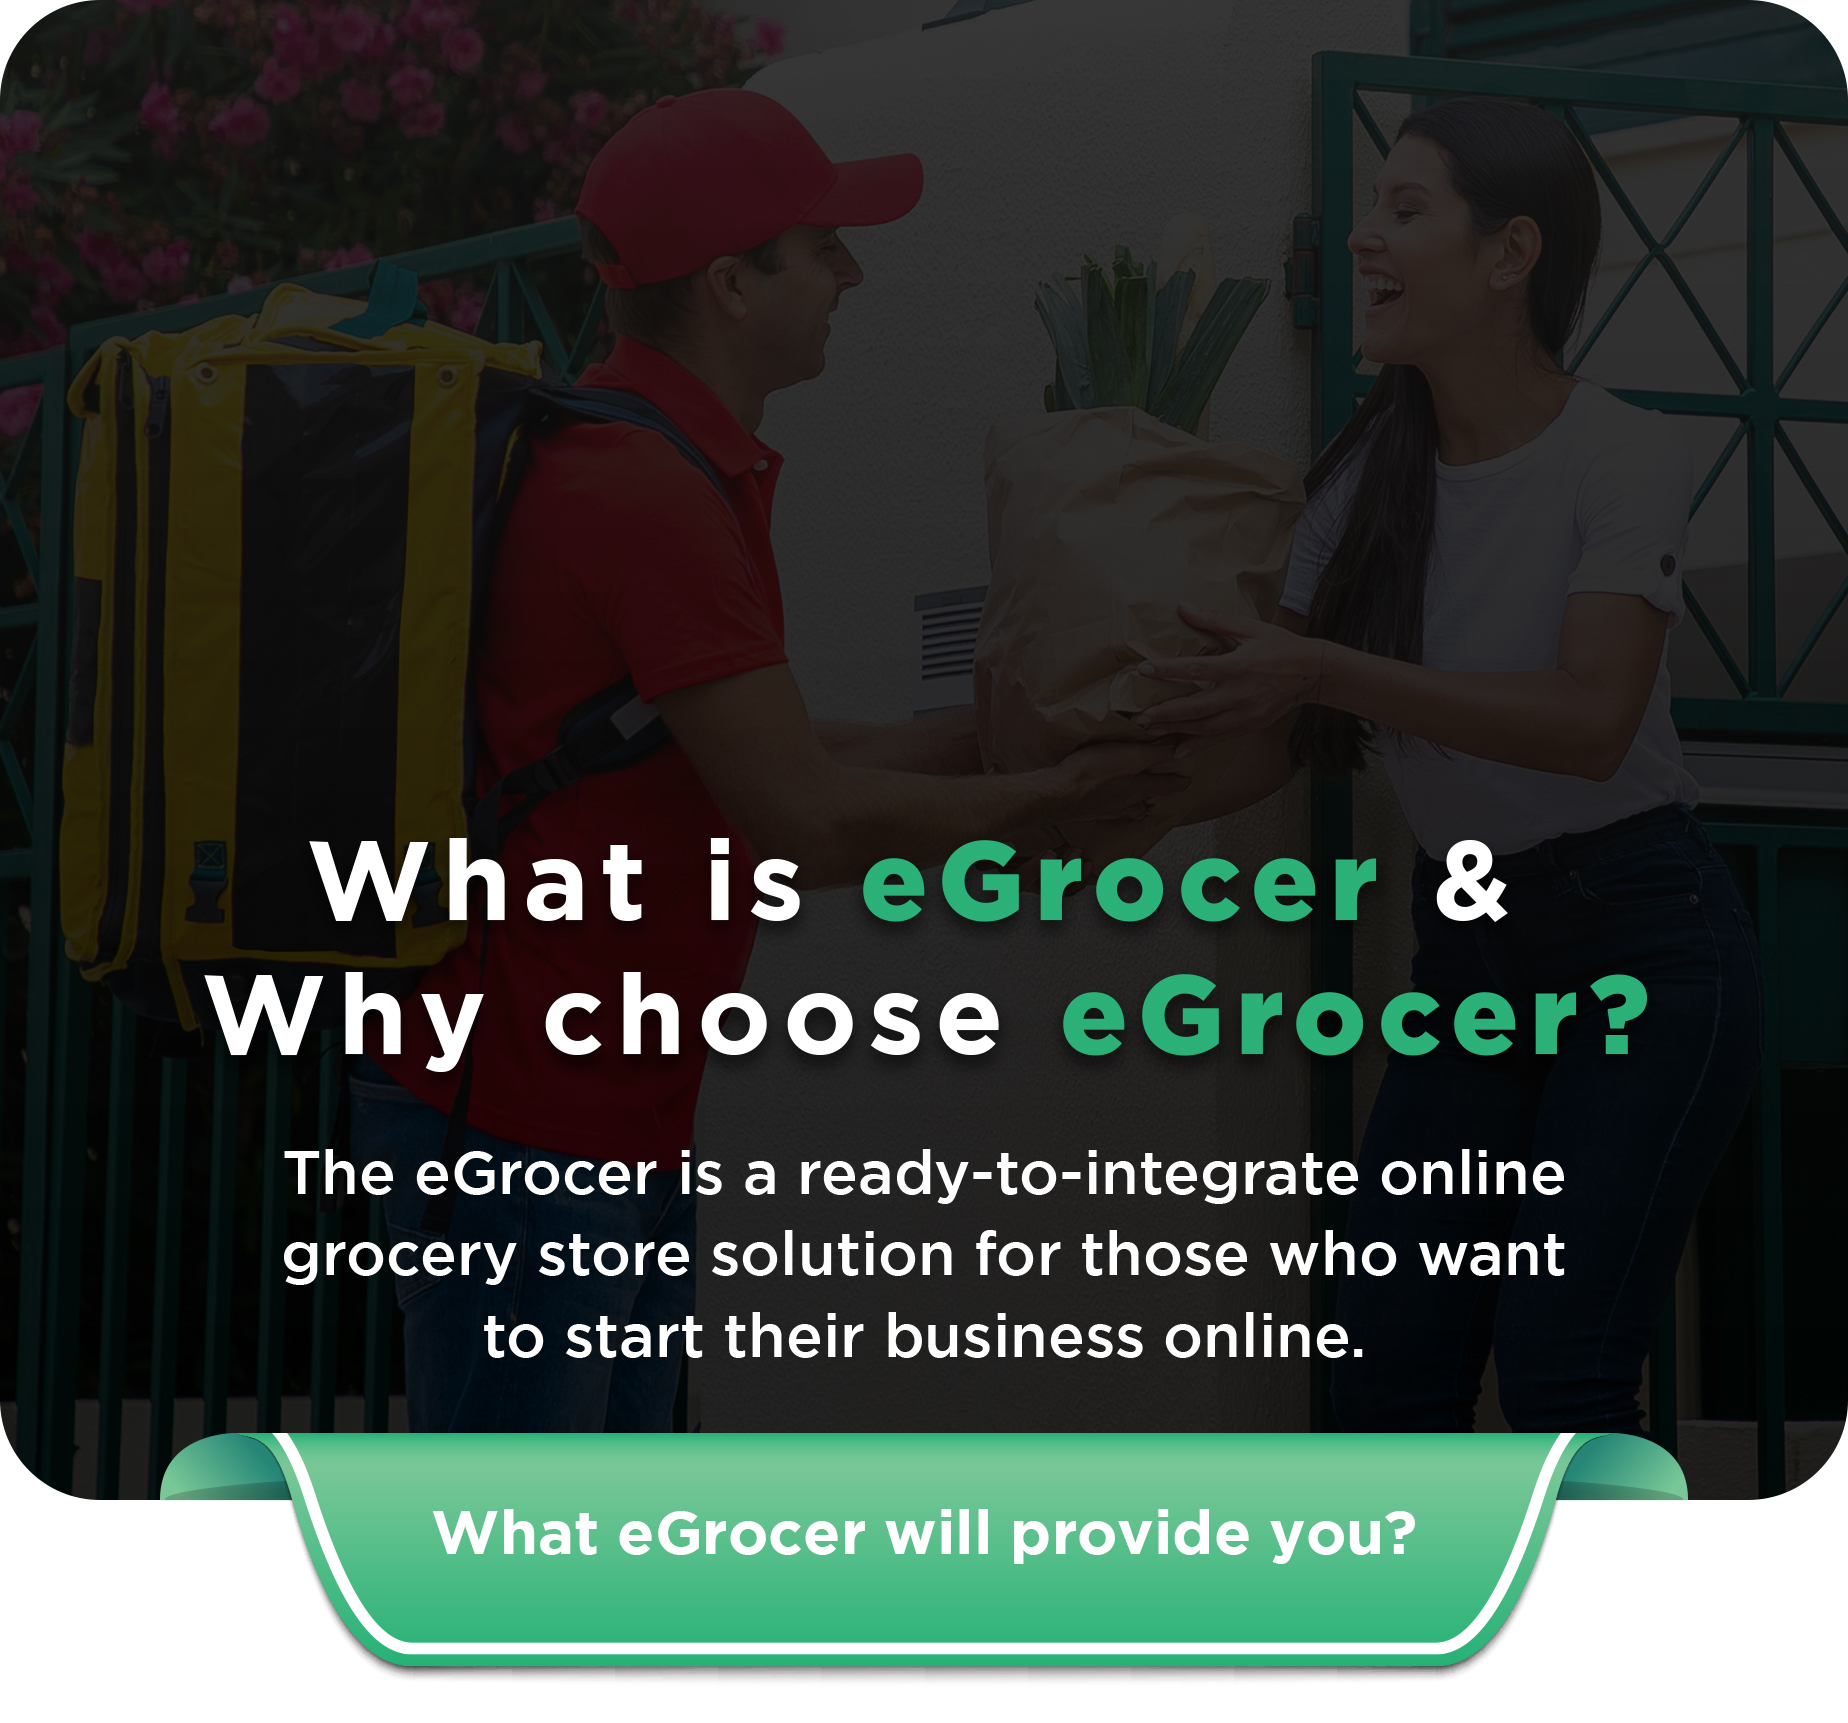 eGrocer - Online Grocery Store, eCommerce Marketplace Flutter Full App with Admin panel - 1